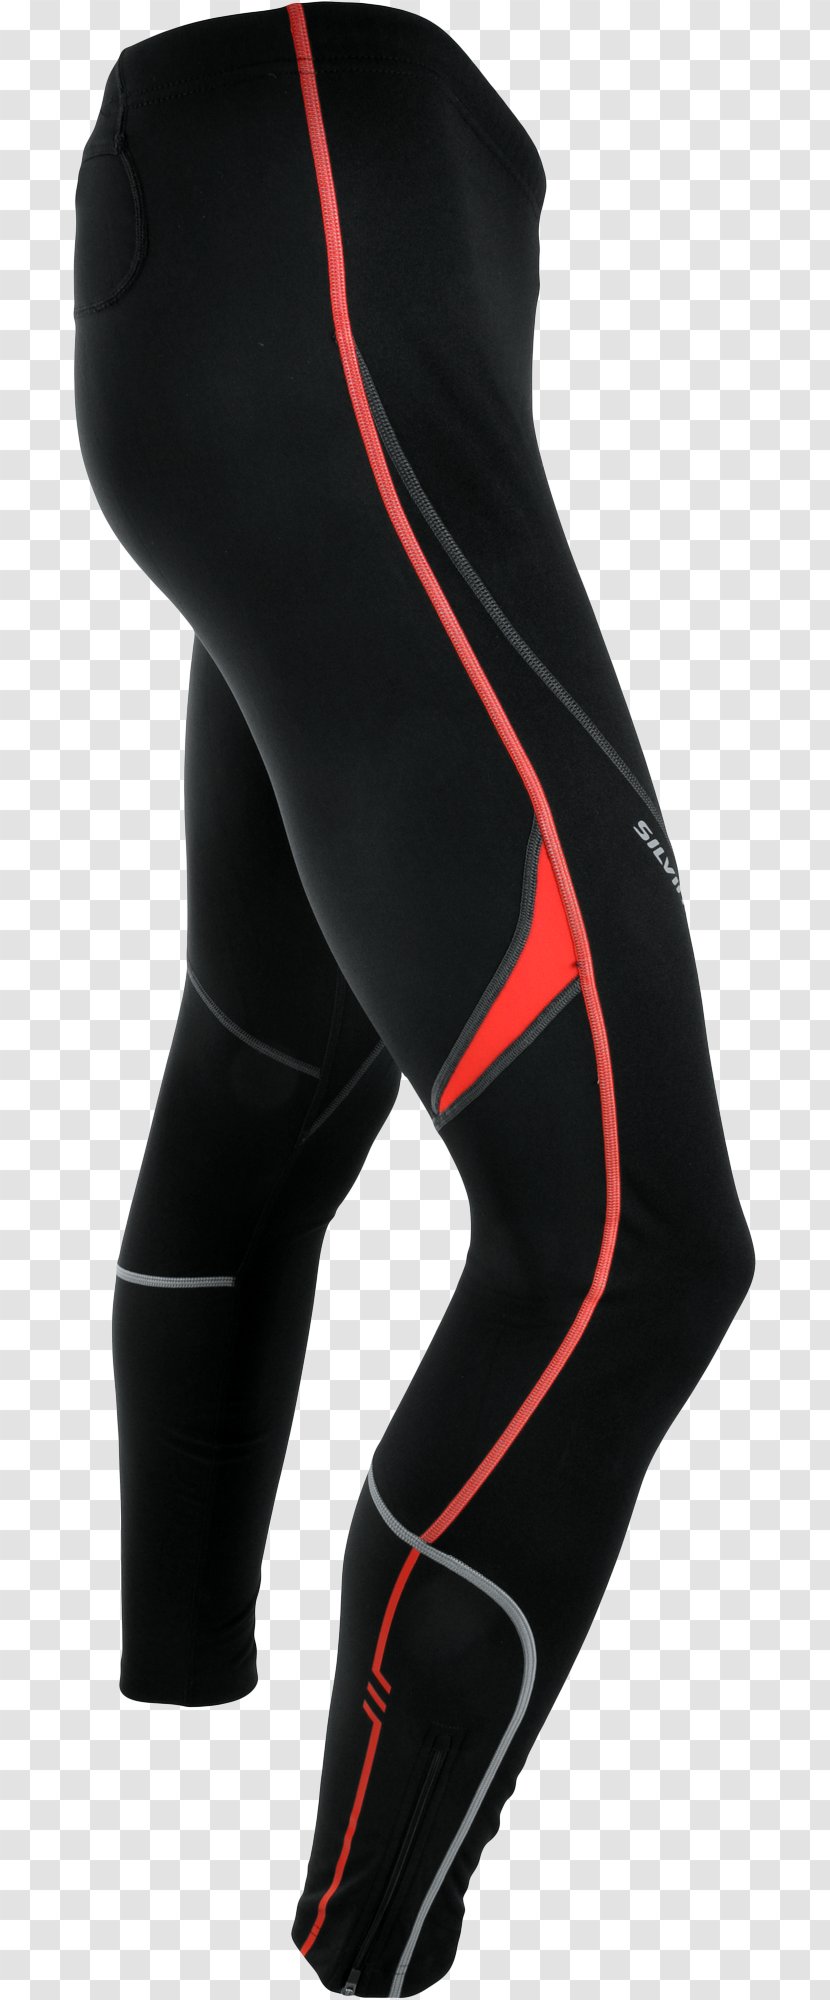 Wetsuit - Trousers - Glare Efficiency Transparent PNG